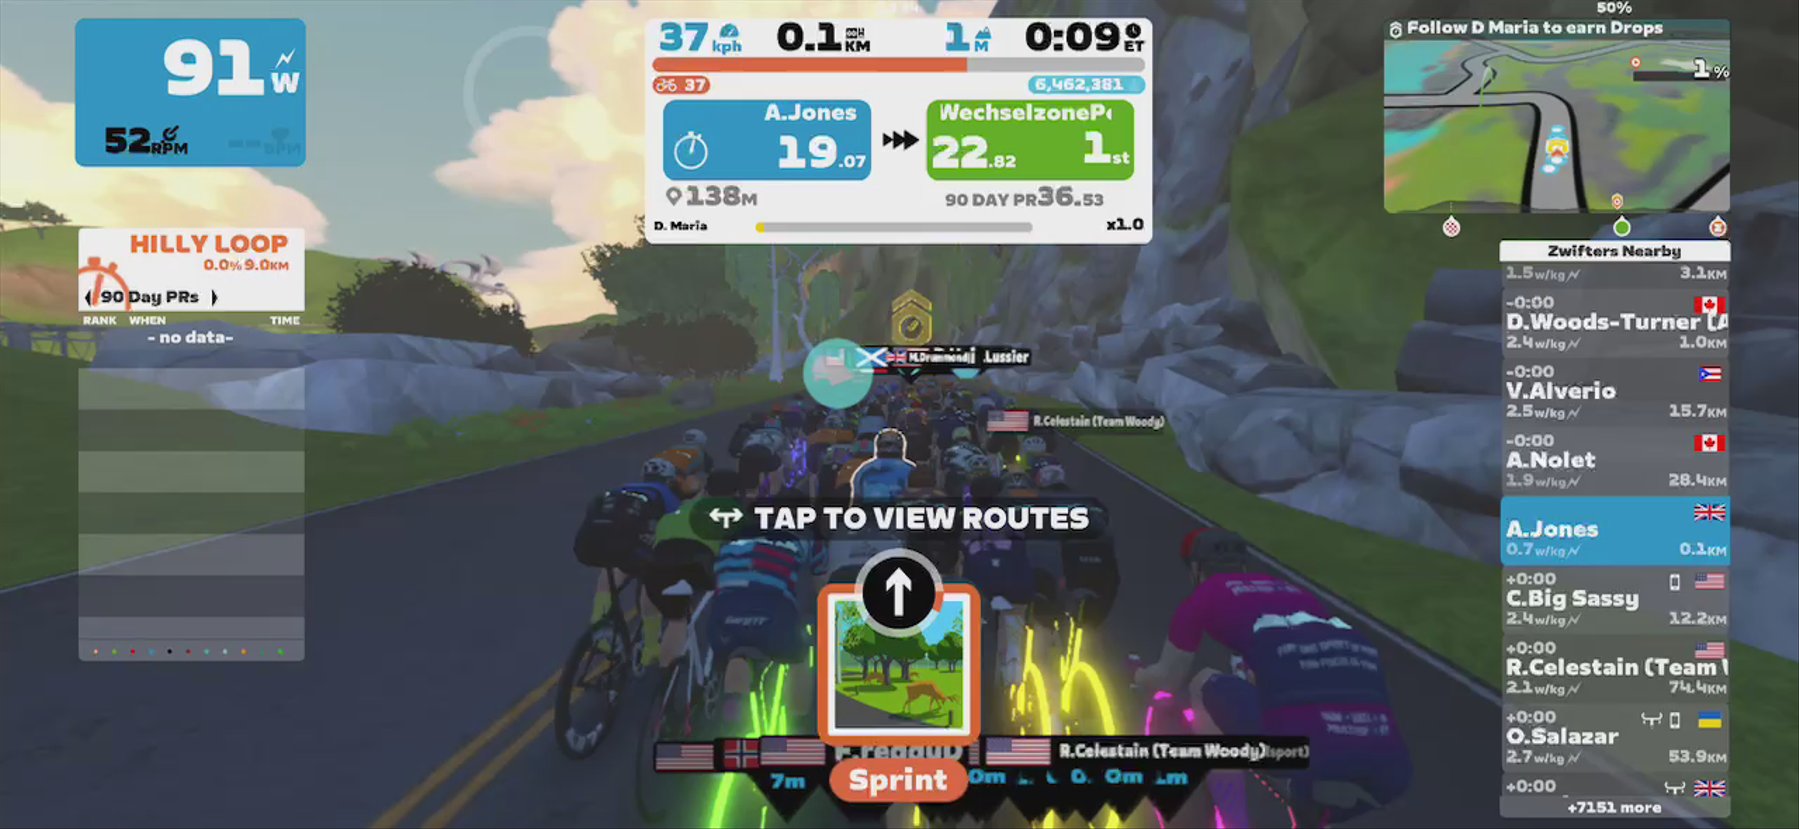 Zwift - Pacer Group Ride: Flat Route in Watopia with Maria